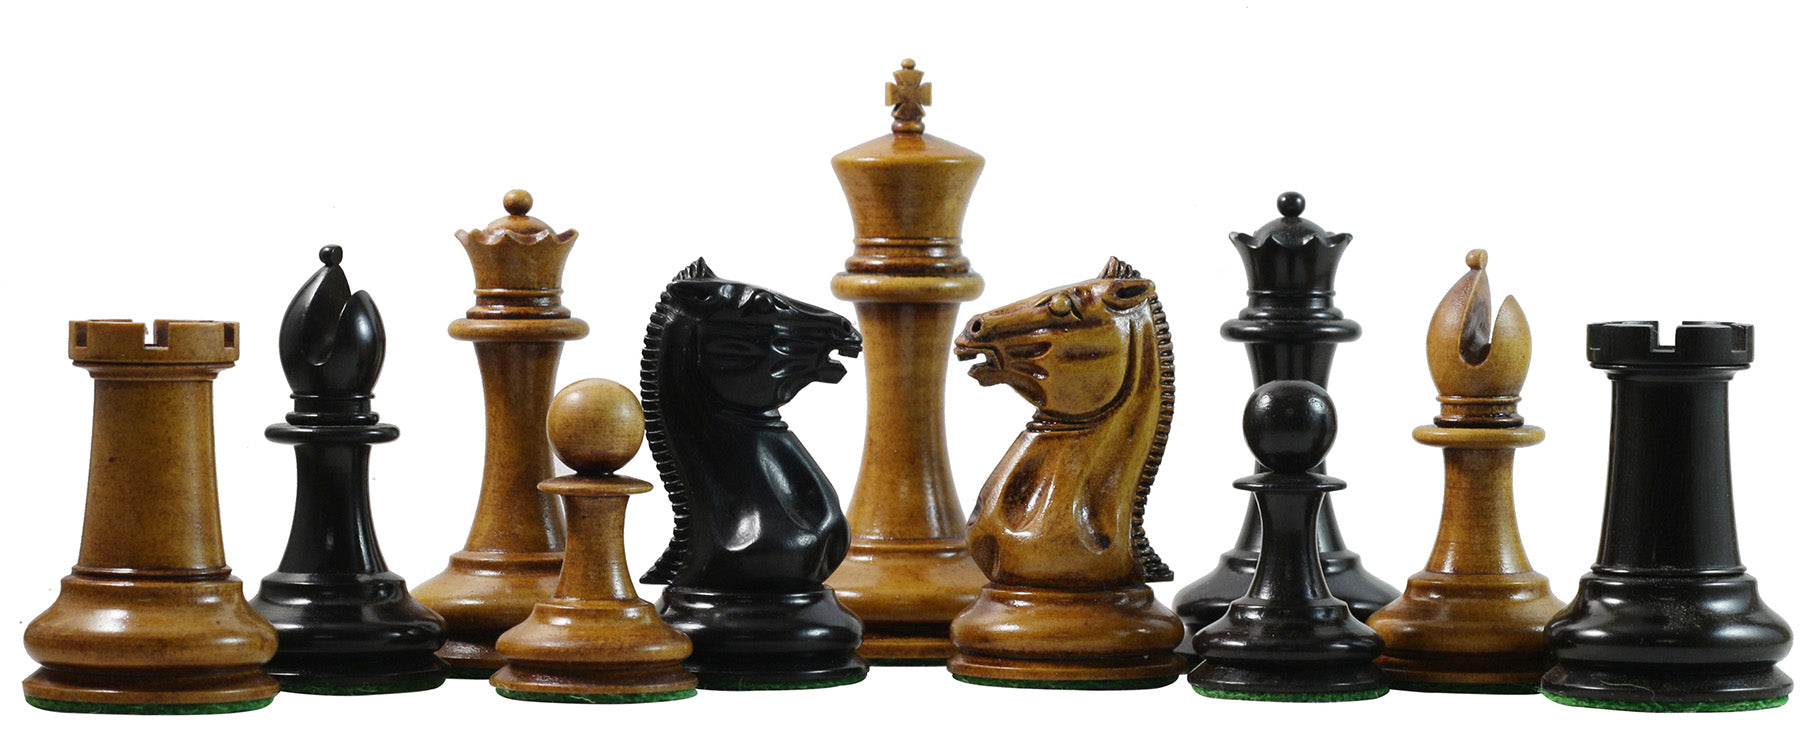 Morphy Cooke 1849-50 Vintage 3.5" Chess Design in Distressed Antique look and Ebony Wood